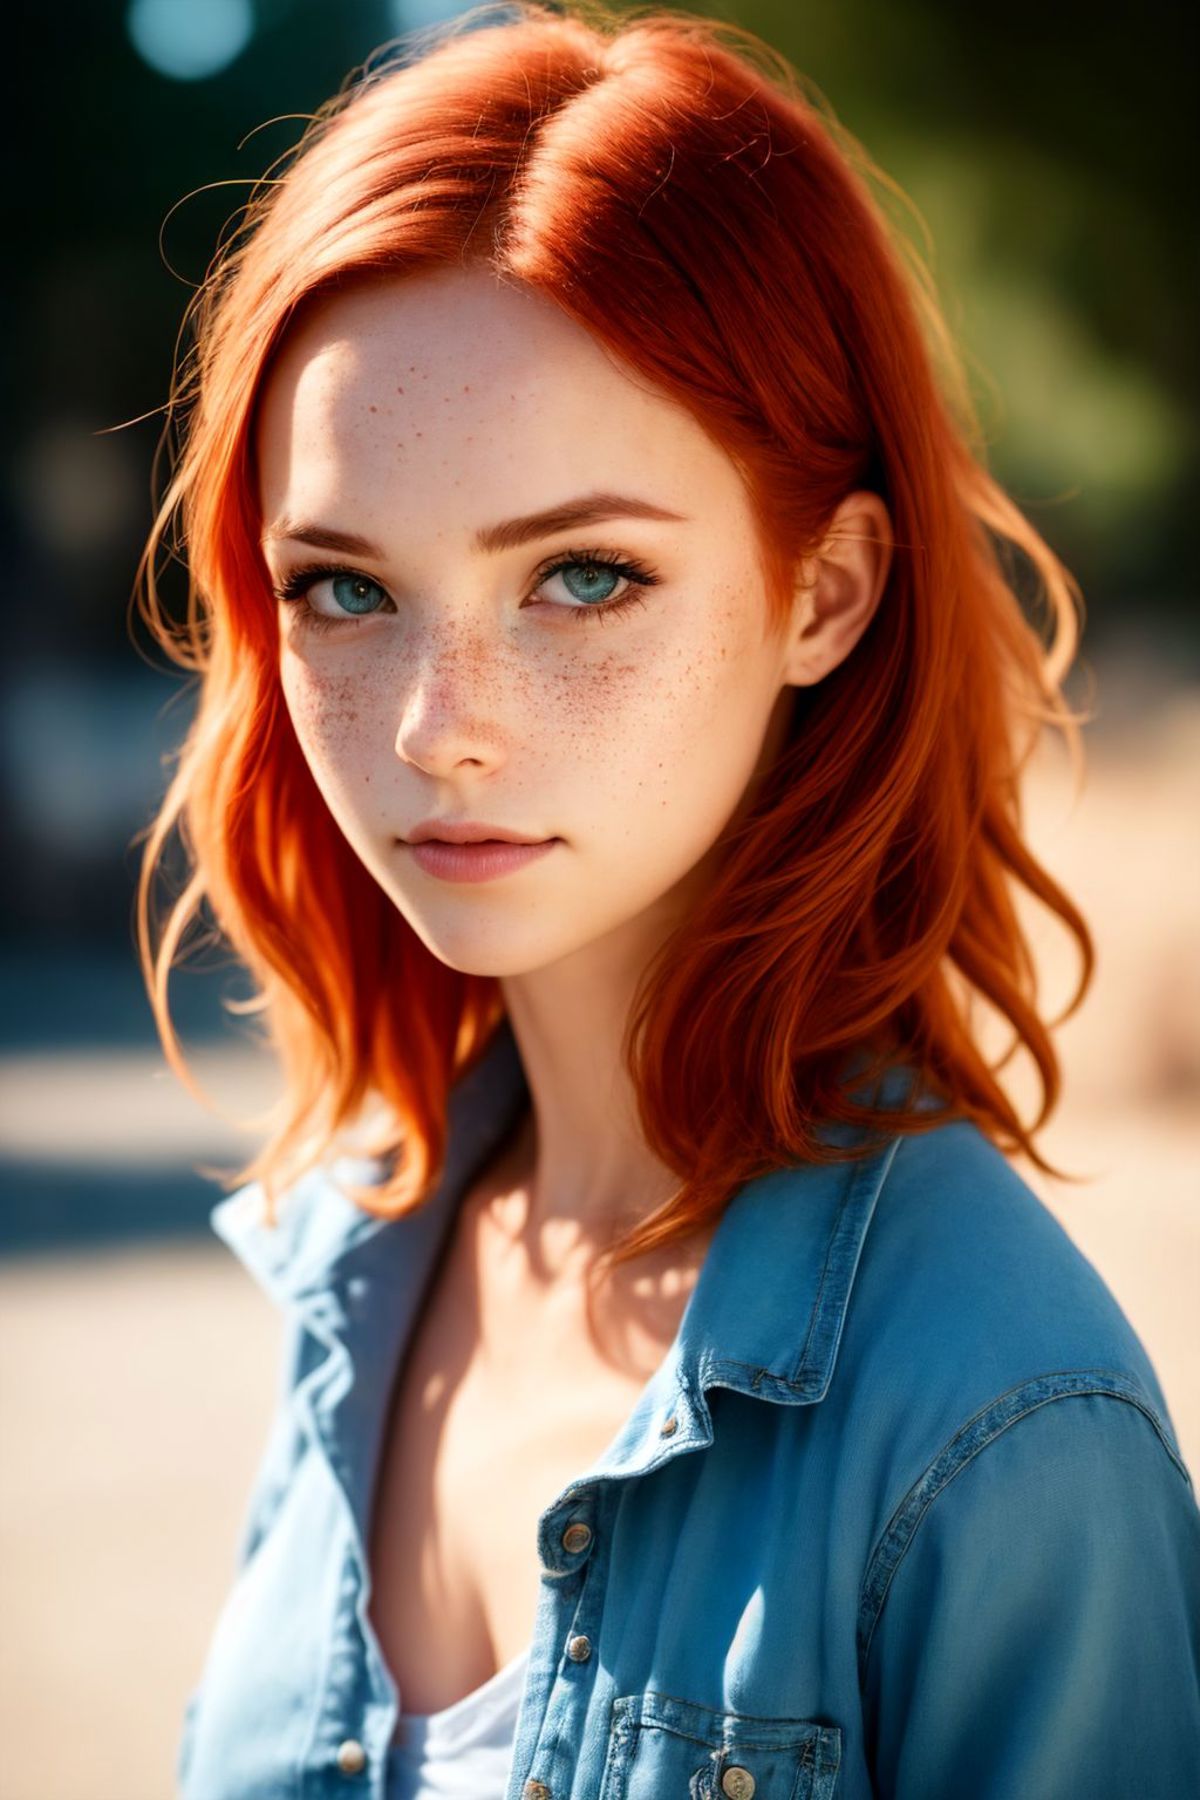 A young woman with red hair and freckles wearing a blue shirt.